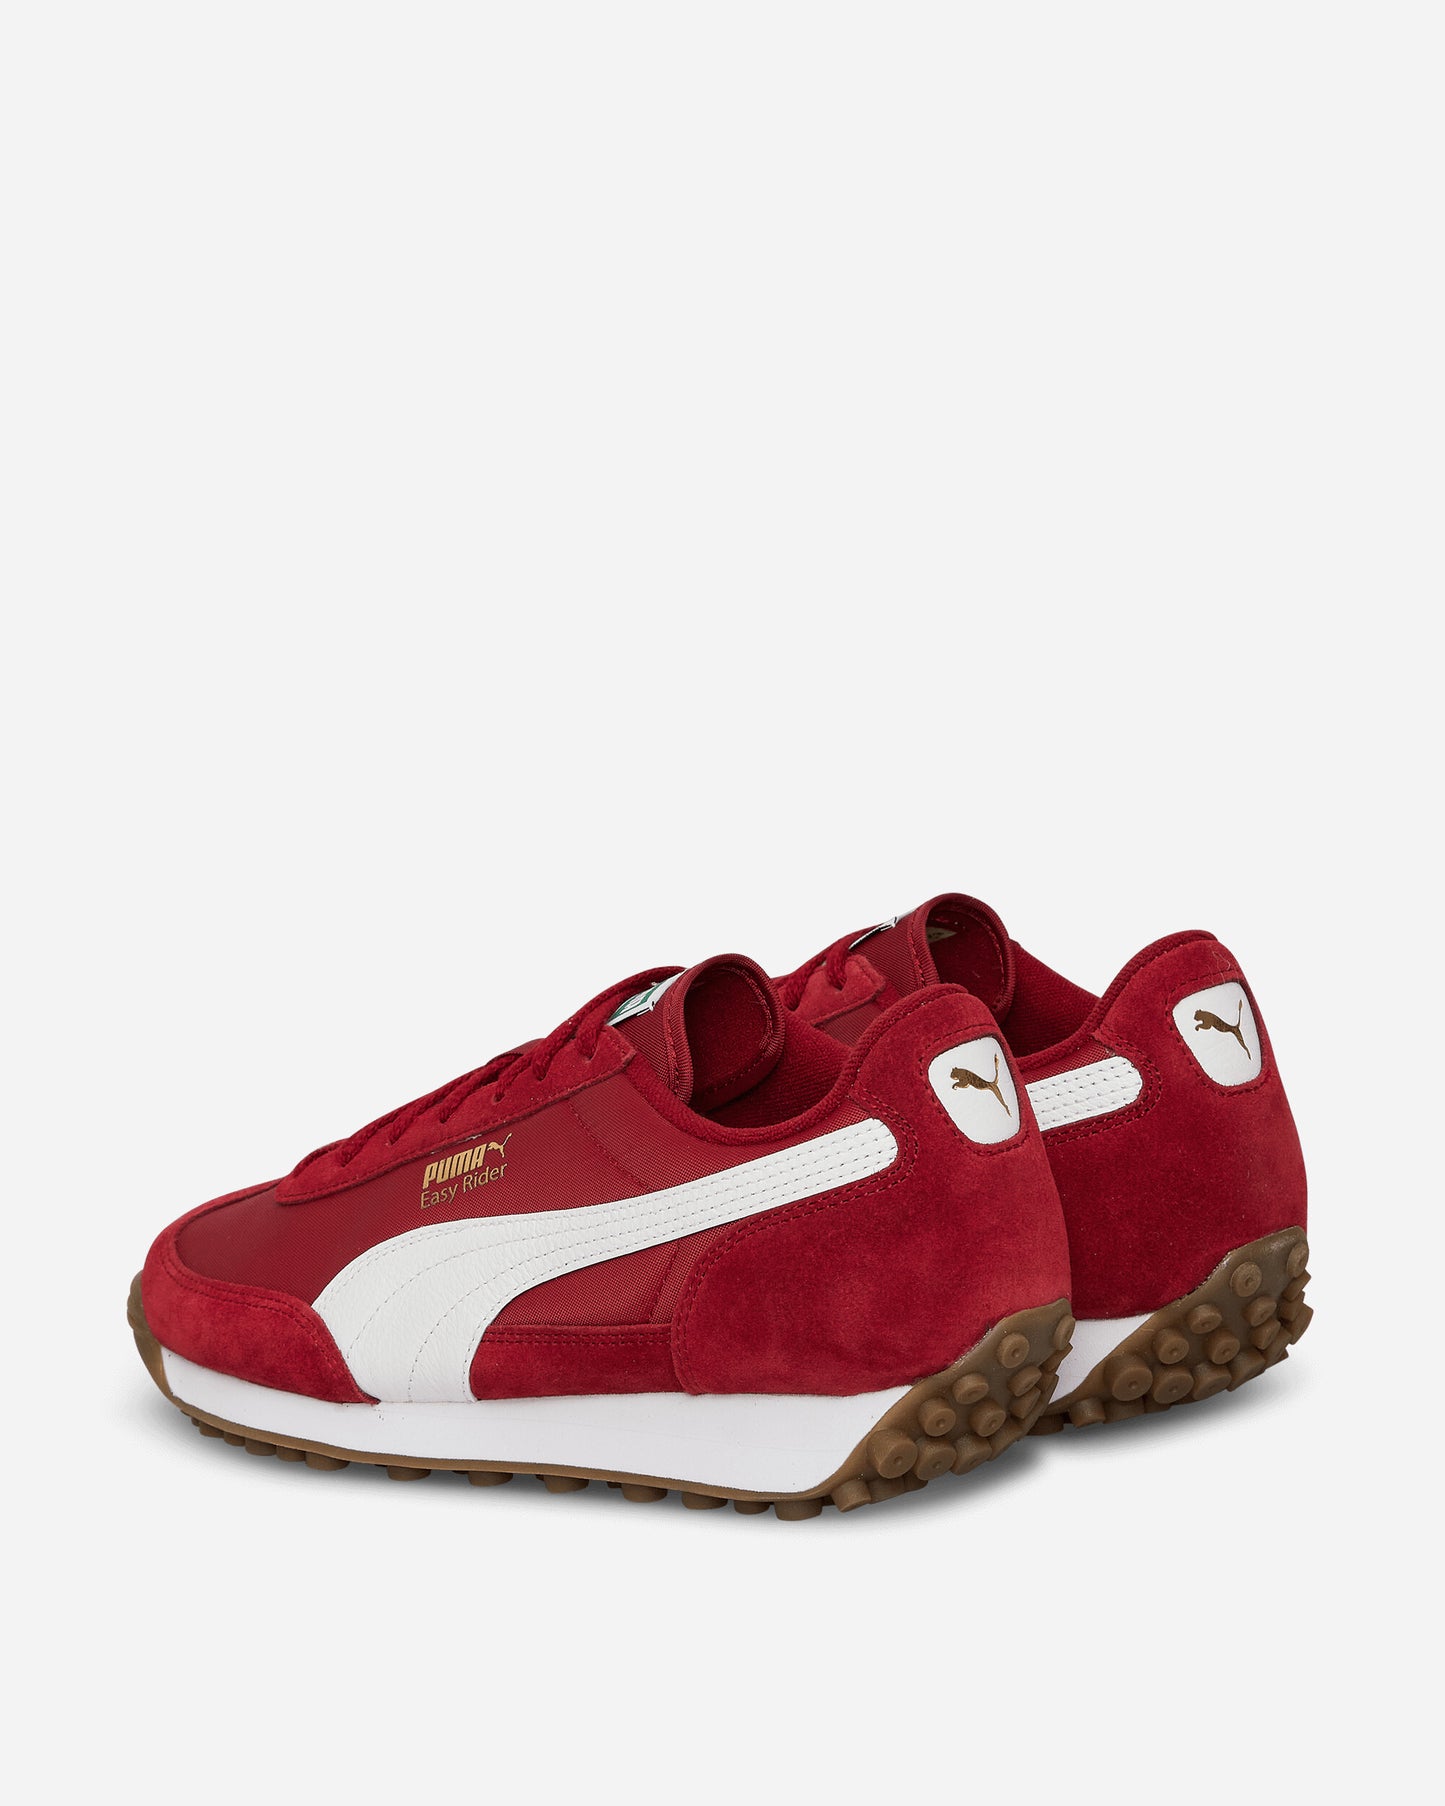 Puma Easy Rider Vintage Intense Red-PUMA Wh Sneakers Low 399028-12